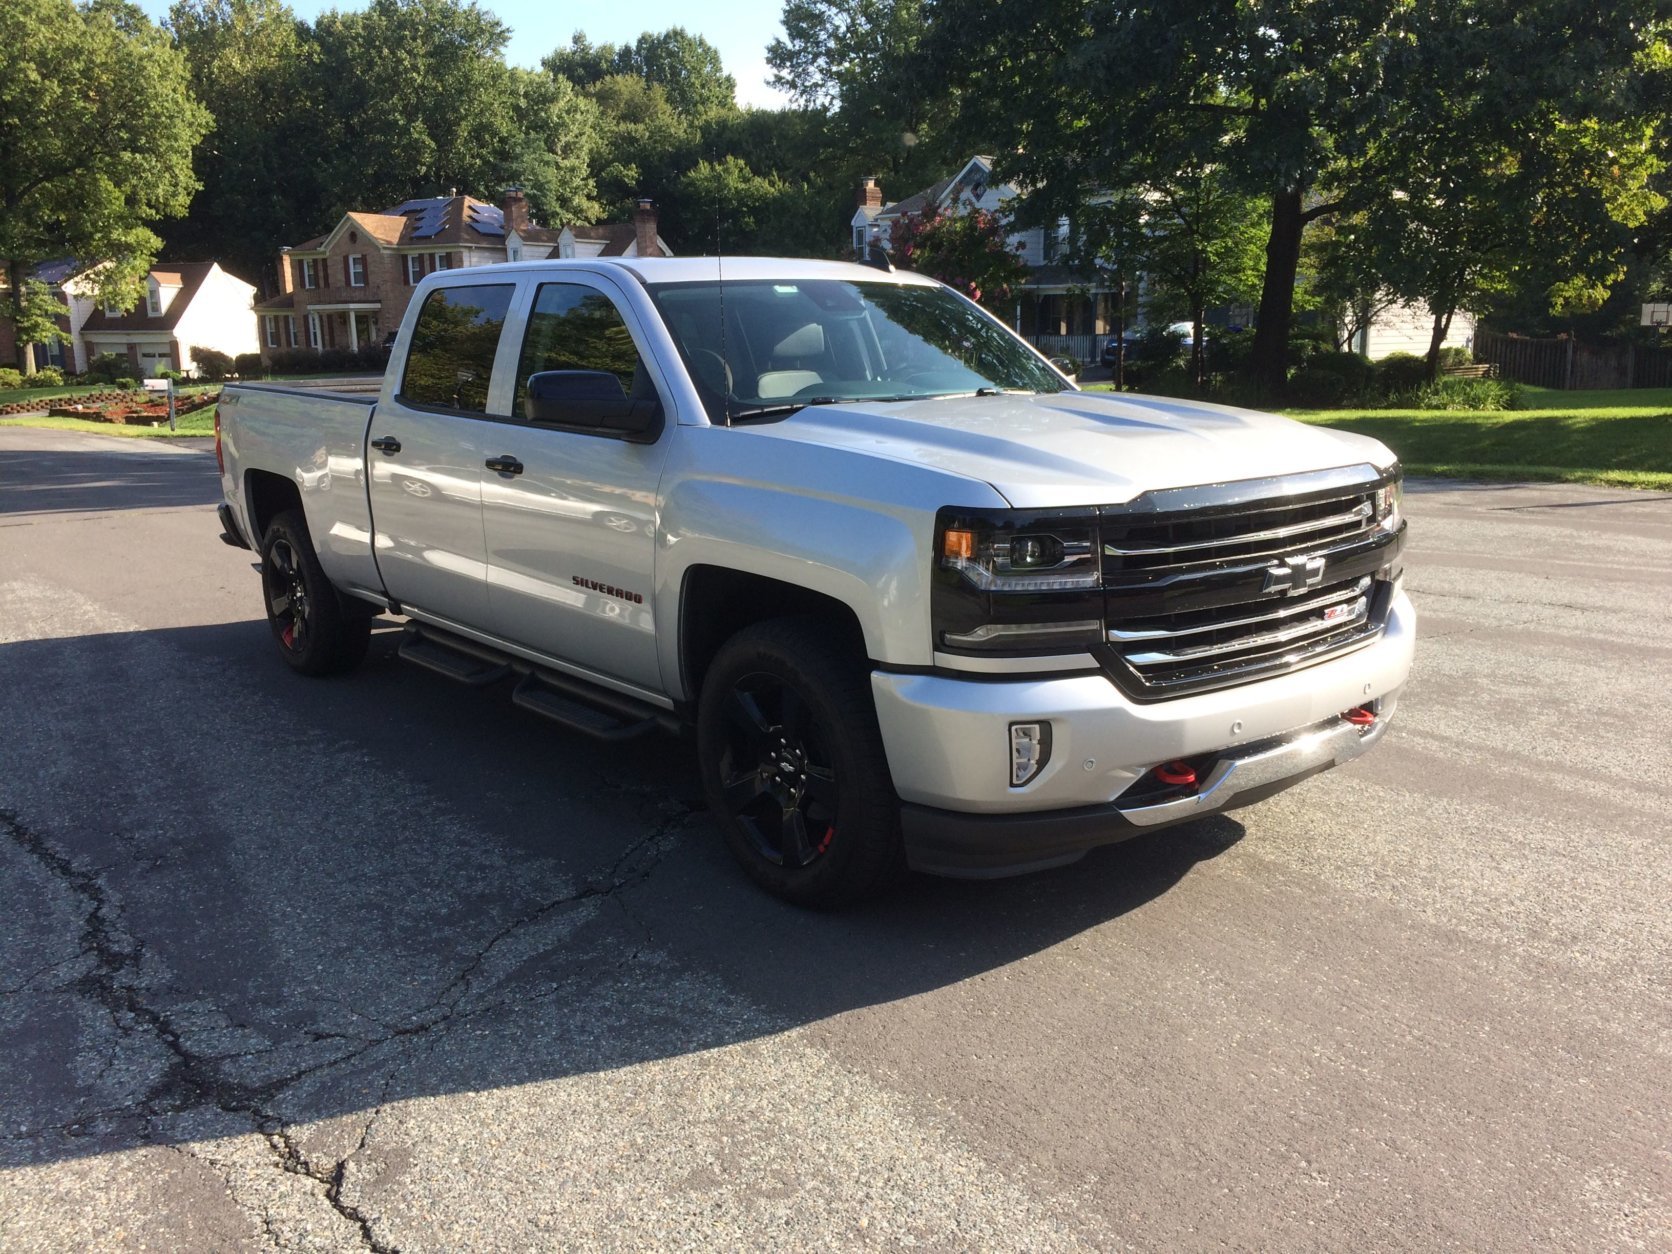 The Silverado feels a bit heavy and ponderous in turns, which should be changed in 2019 with the use of more lightweight materials. The ride is near the top of the class with the ability to handle bumps well and with less of that shake you get with empty beds over large bumps. (WTOP/Mike Parris)